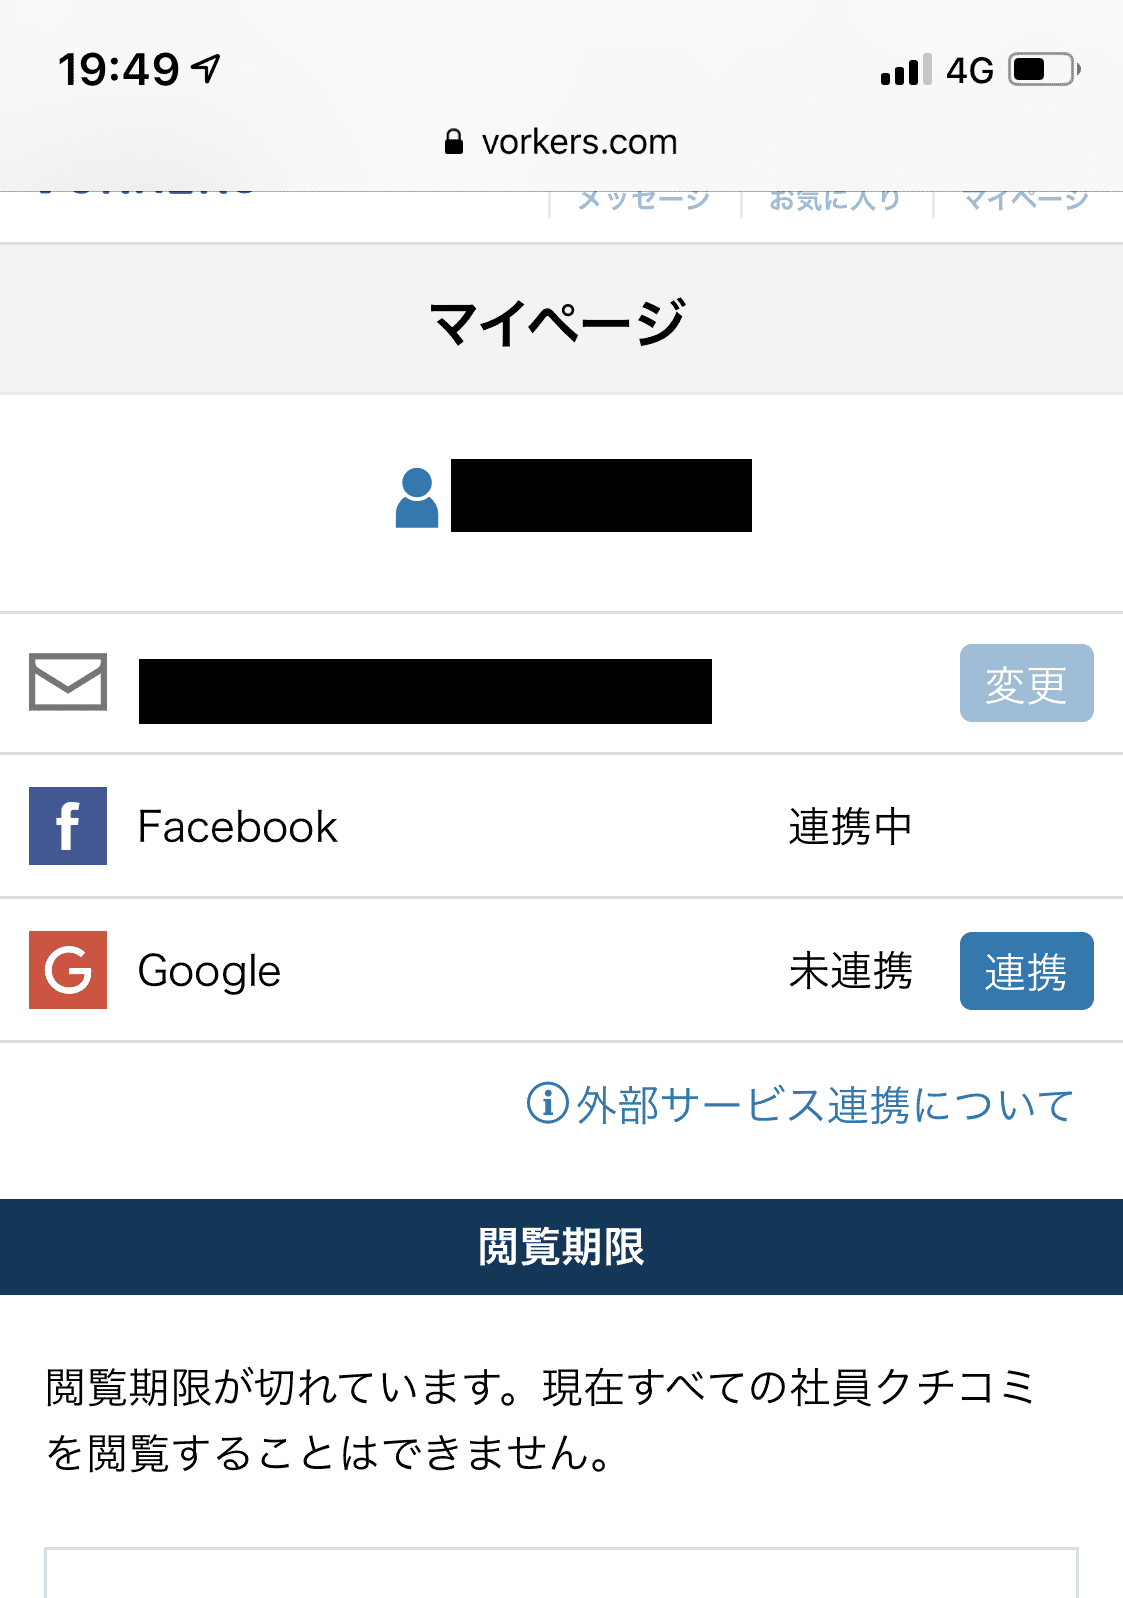 VORKERSのマイページ画面